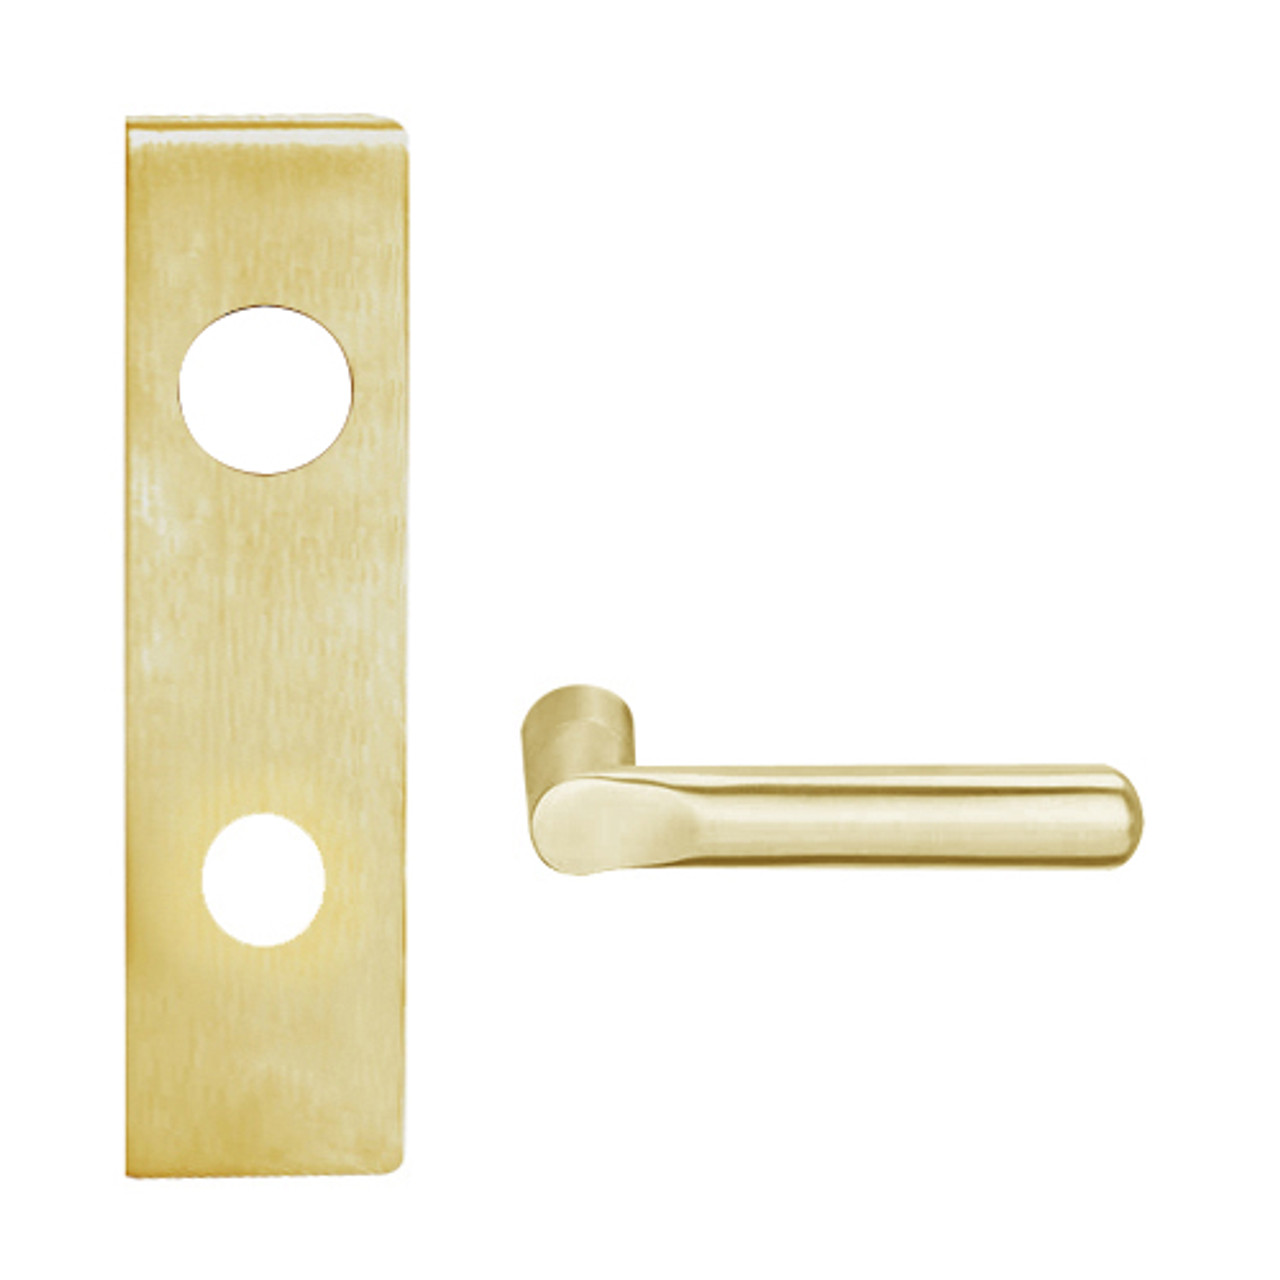 L9026J-18N-606 Schlage L Series Exit Lock with Cylinder Commercial Mortise Lock with 18 Cast Lever Design Prepped for FSIC in Satin Brass